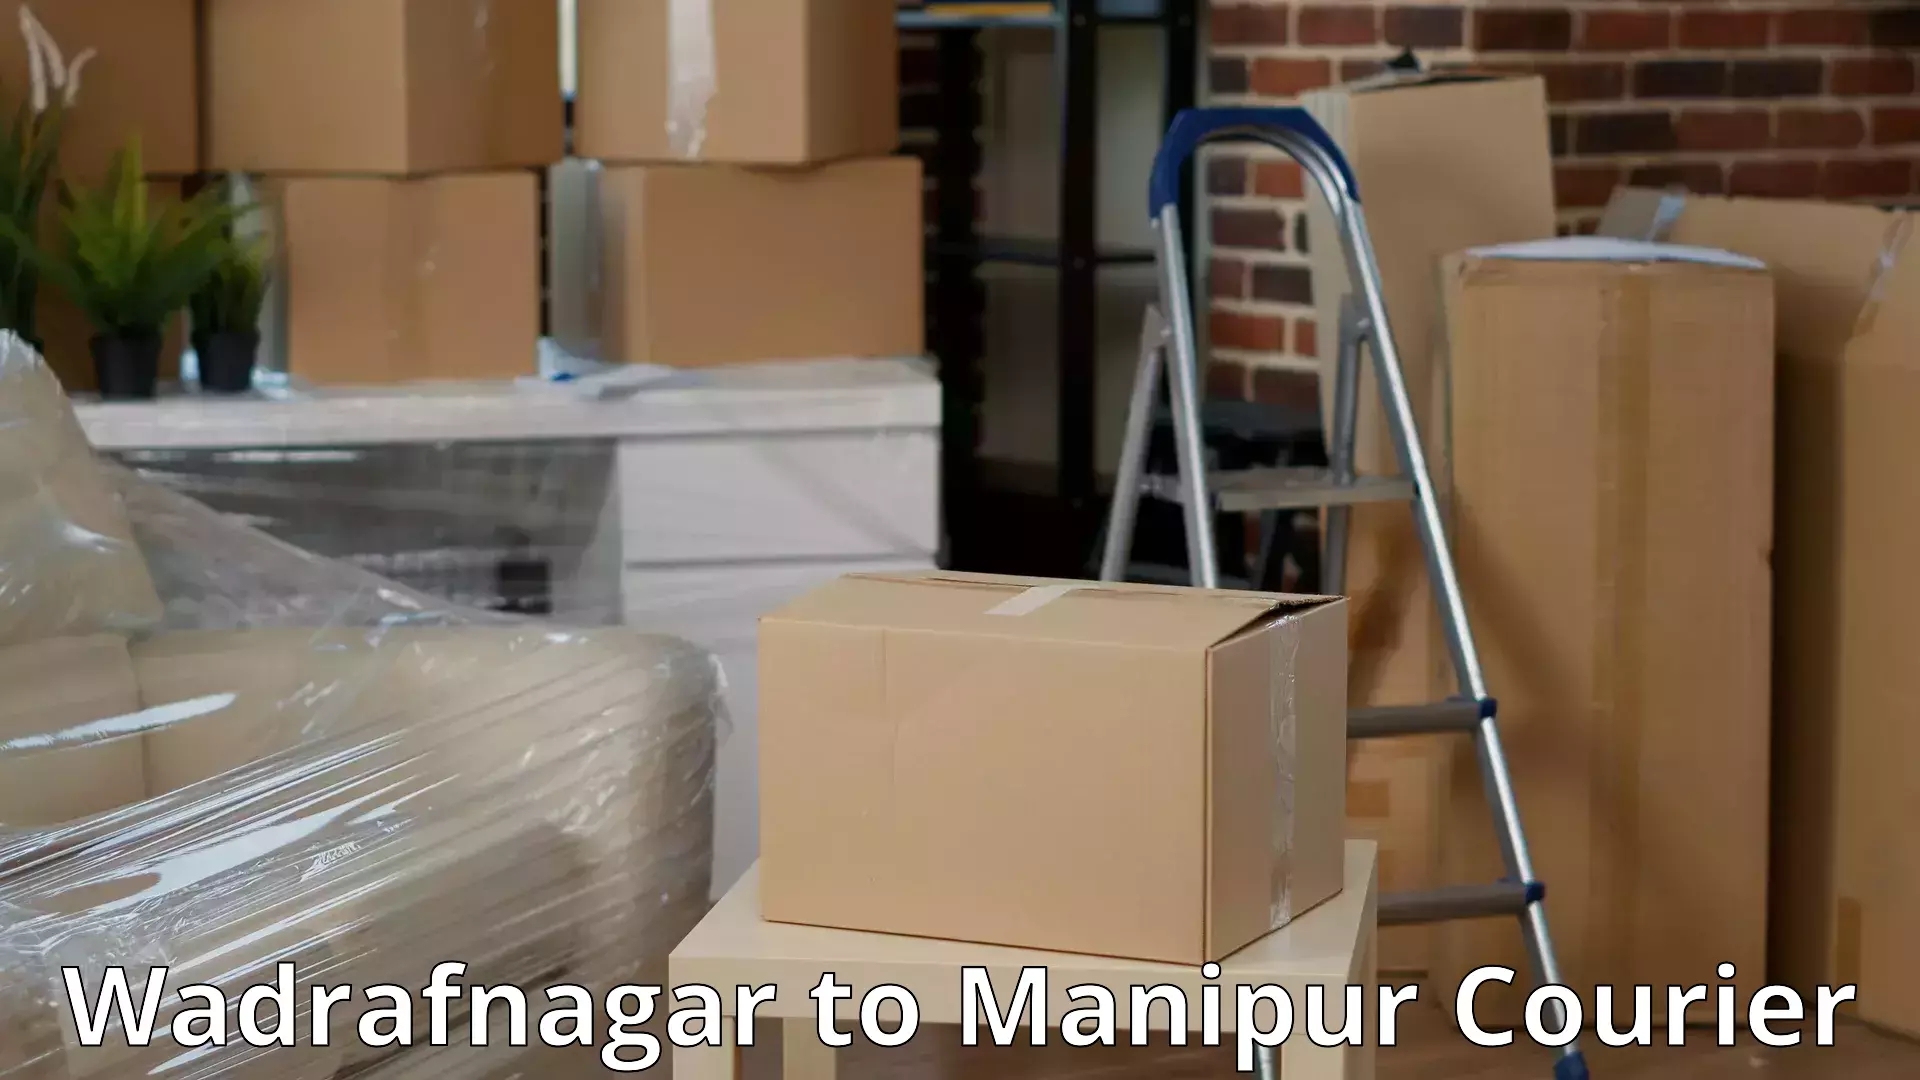 Moving and storage services Wadrafnagar to Thoubal